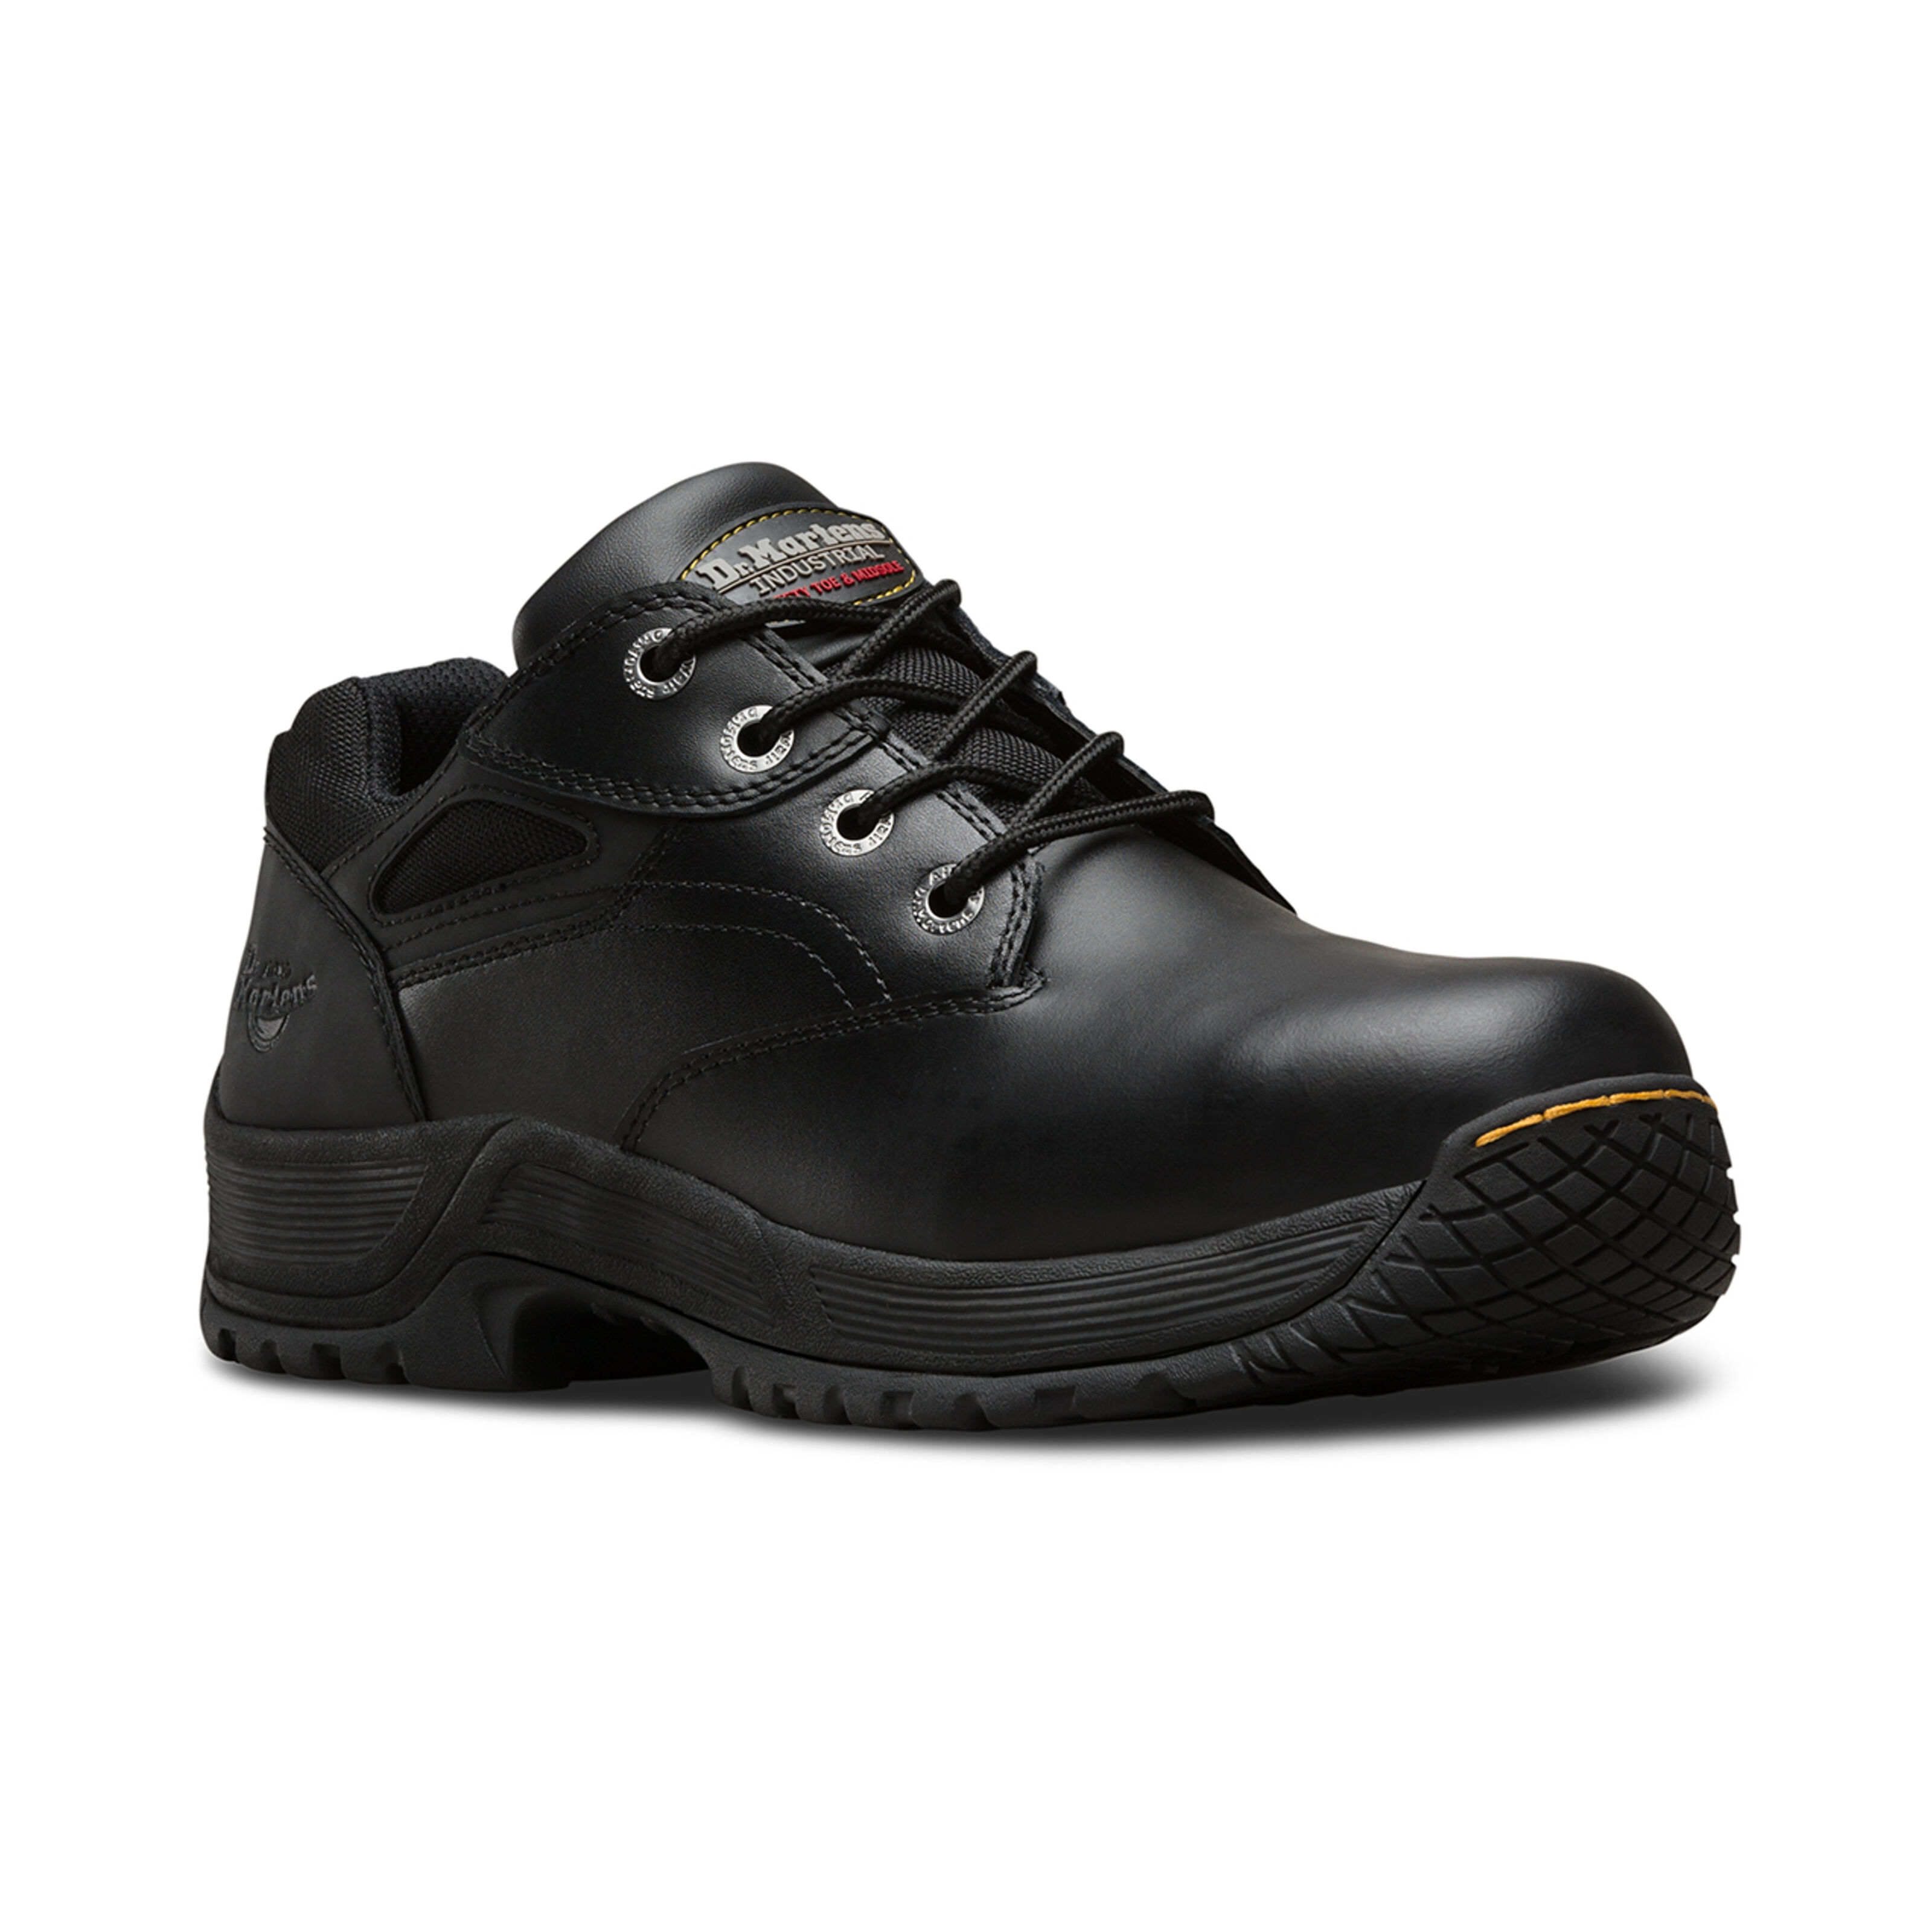 Dr Martens Icon Black Leather Steel Toe Cap Heavy Duty Safety Shoes